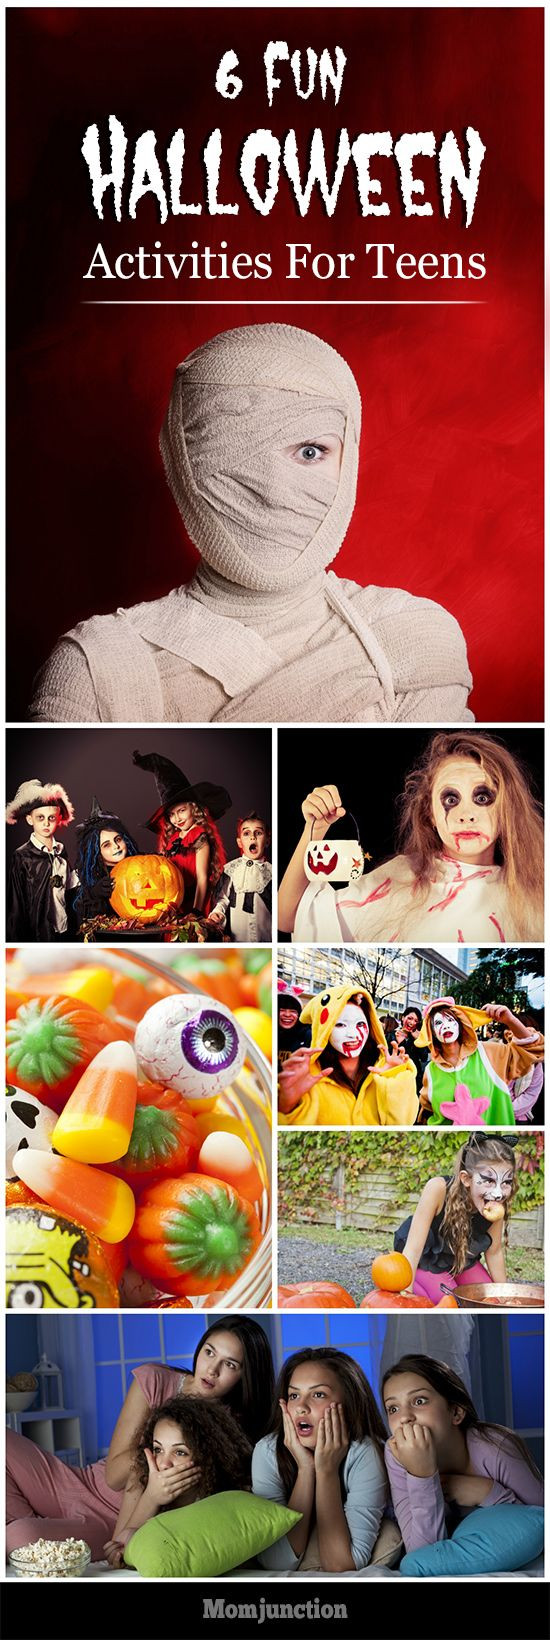 Halloween Party Ideas For Teens
 307 best images about Teen Topics on Pinterest